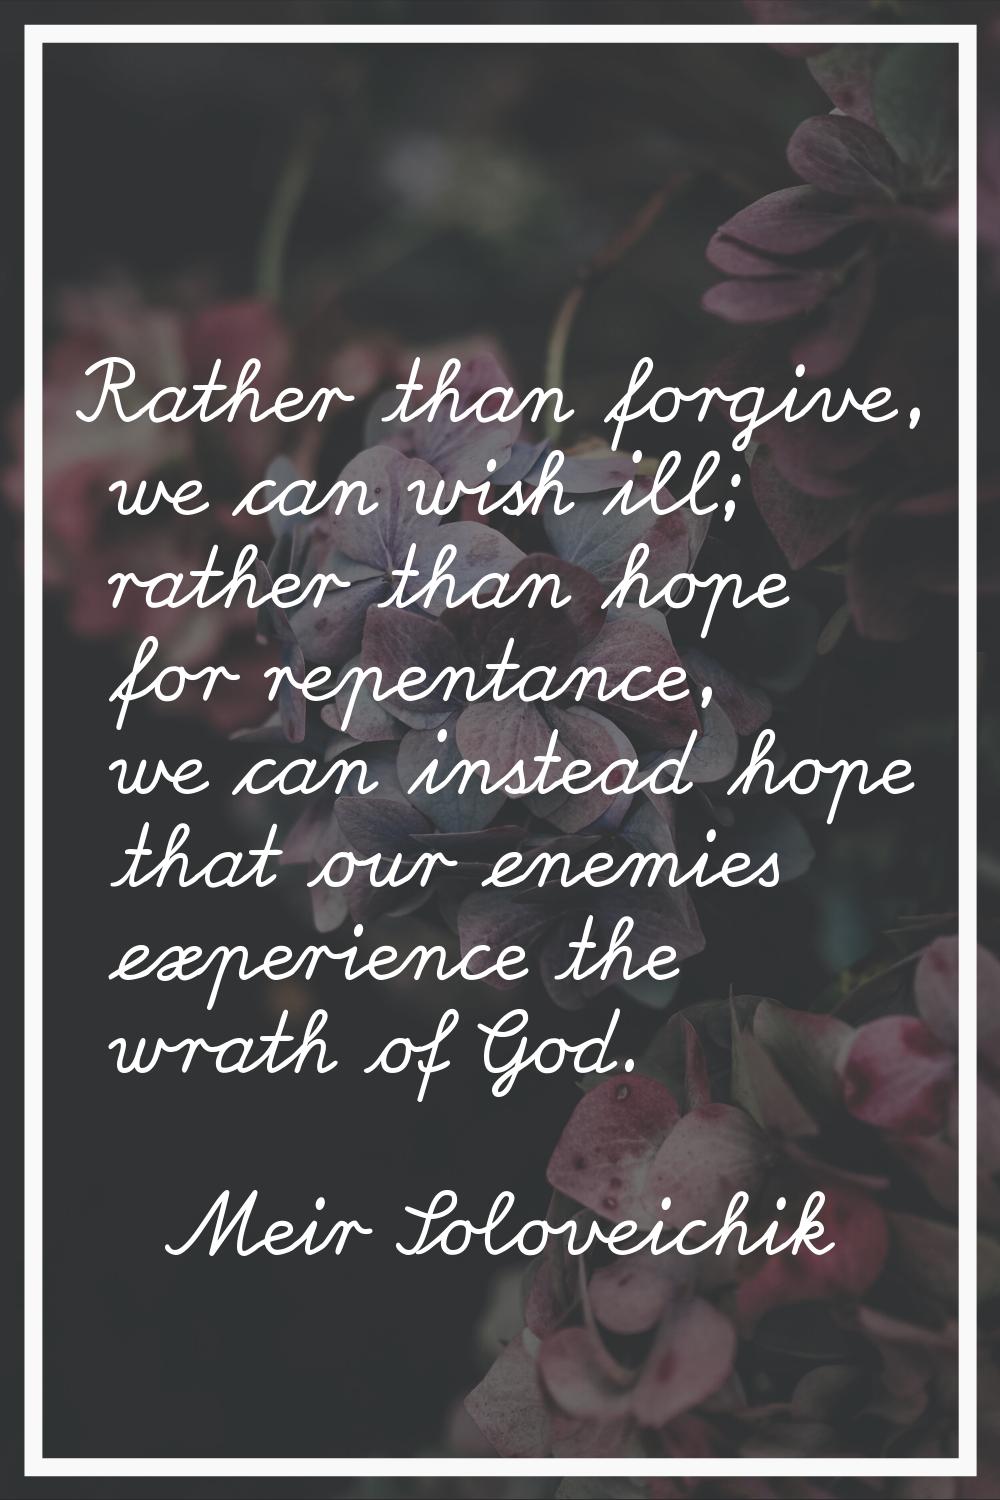 Rather than forgive, we can wish ill; rather than hope for repentance, we can instead hope that our